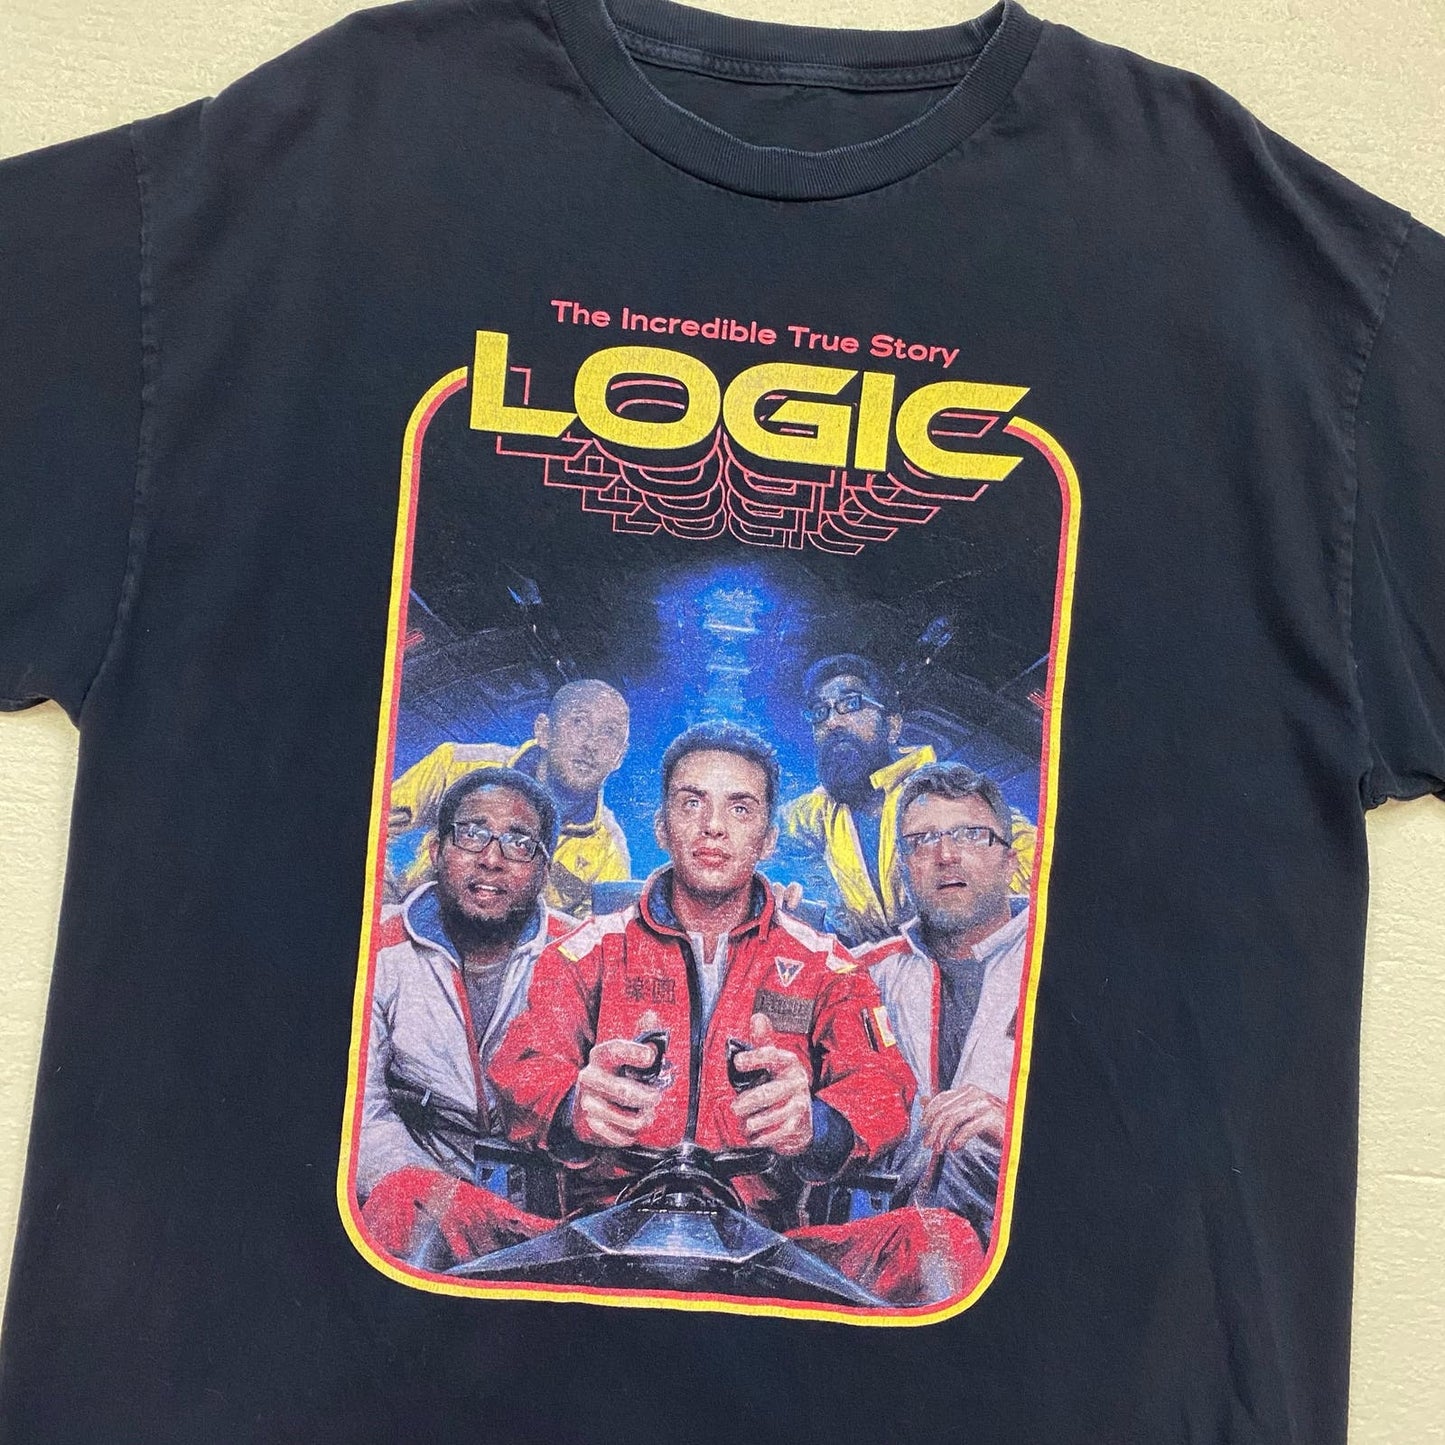 Secondhand The Incredible True Story Logic Graphic T-Shirt, Size XL